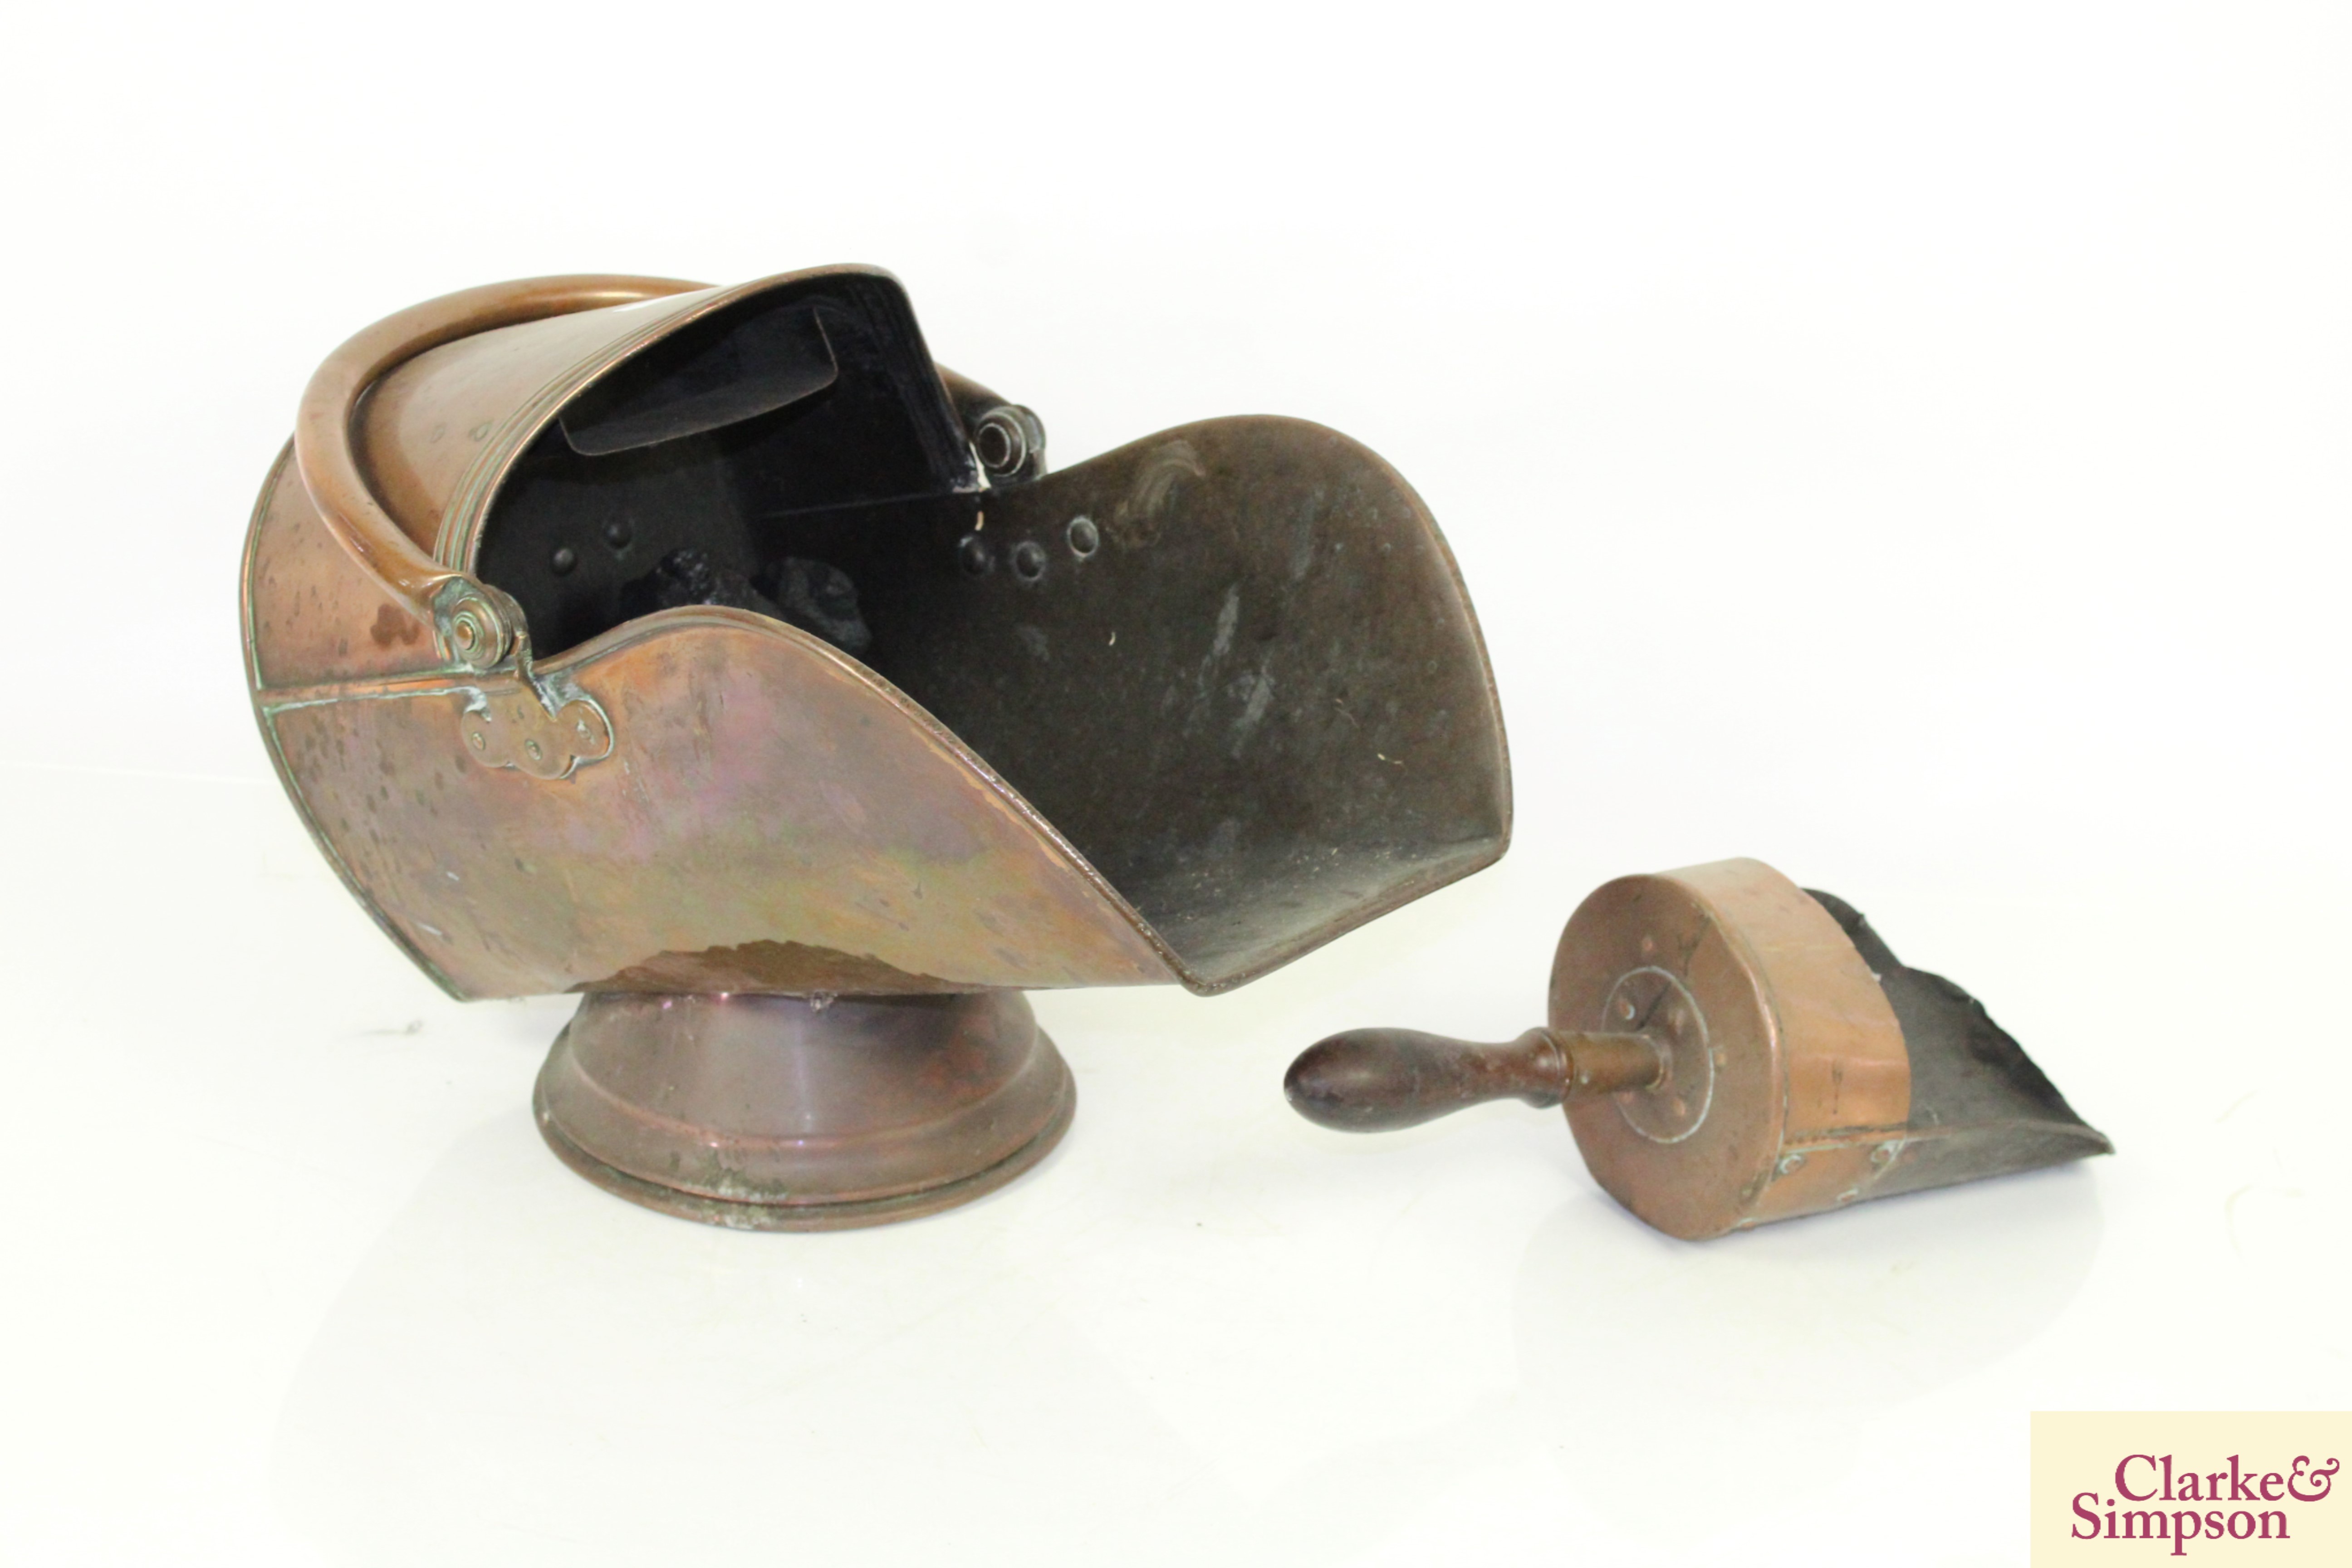 An antique copper coal scuttle and scoop with turn